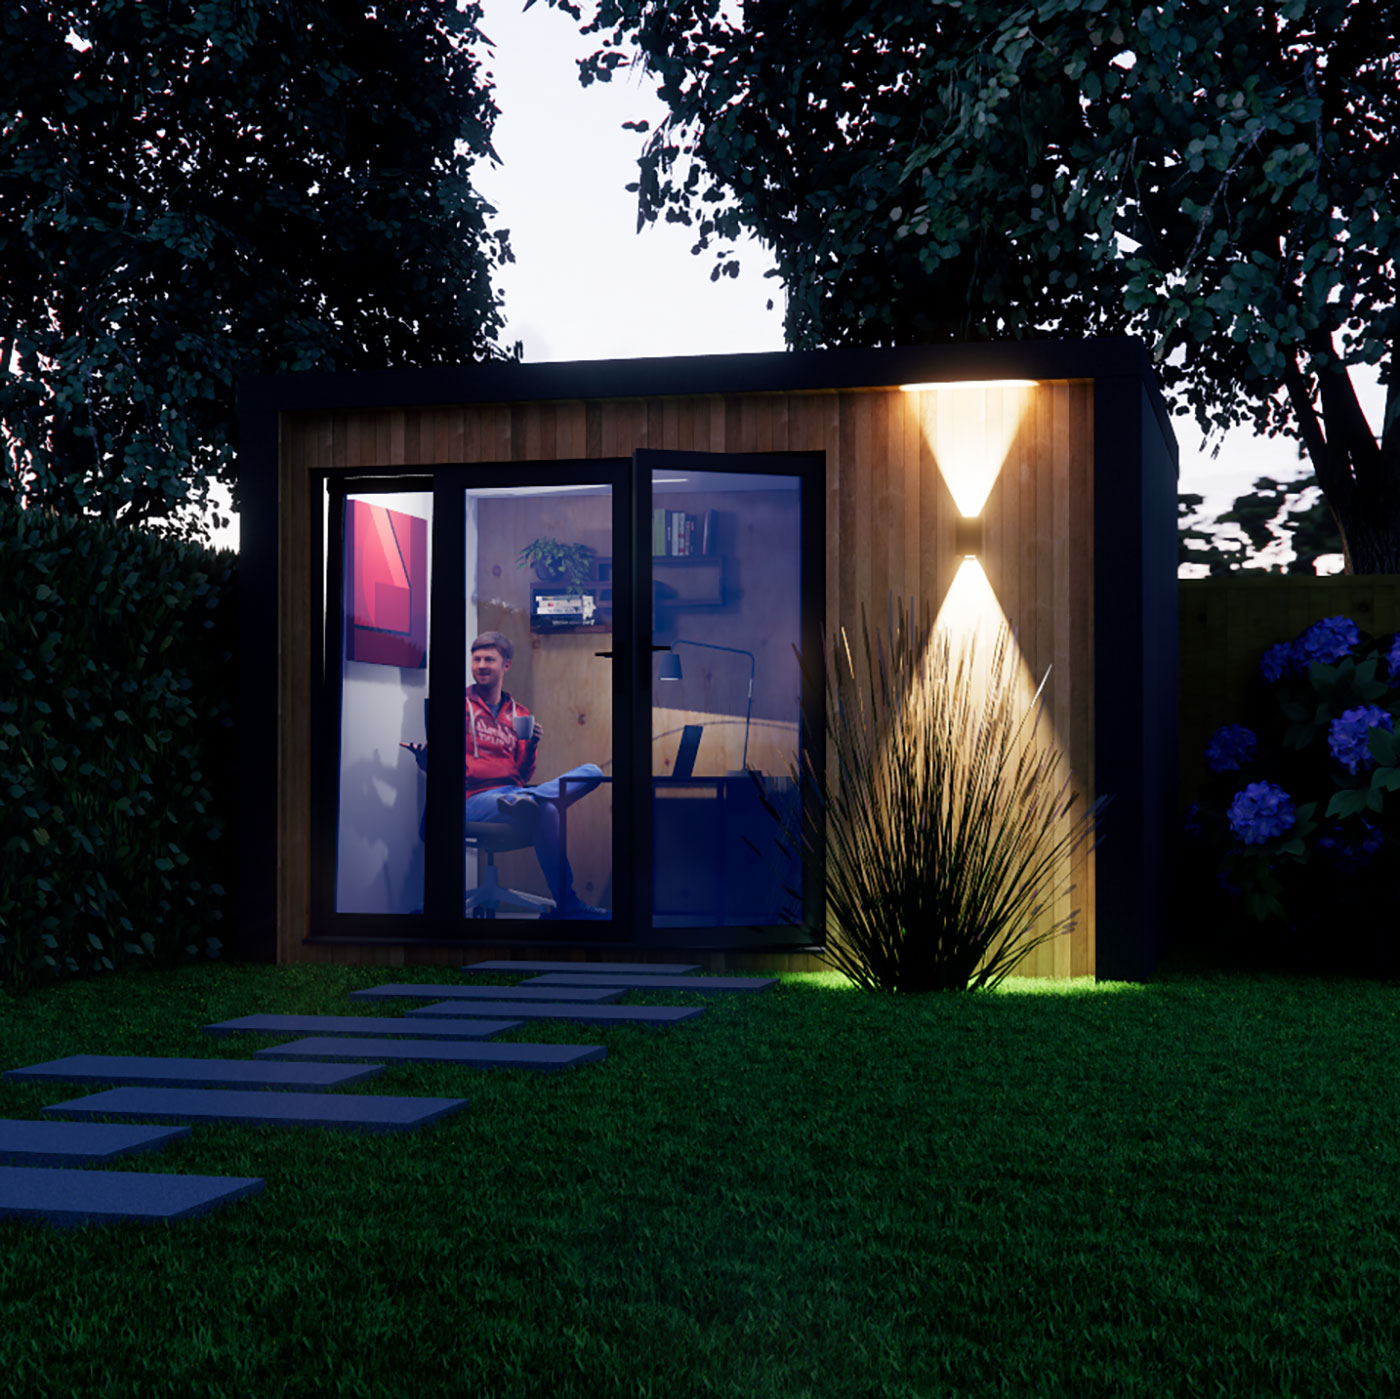 Night time visualisation of 2.6m by 3.8m garden room design